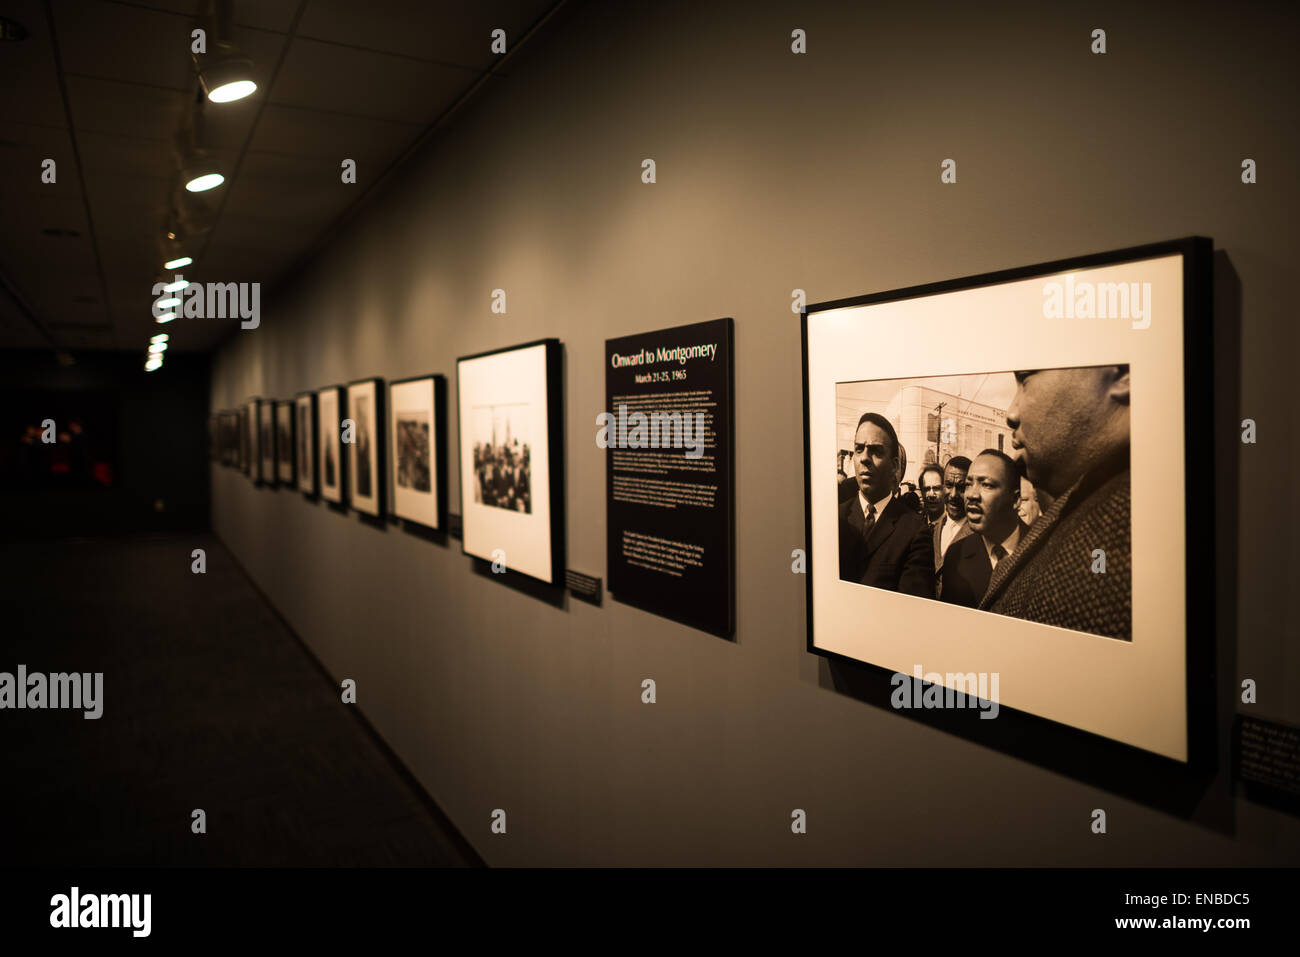 AUSTIN, Texas - A photo exhibit on Selma and the Civil Rights movement on display at the LBJ Library. The LBJ Library and Museum (LBJ Presidential Library) is one of the 13 presidential libraries administered by the National Archives and Records Administration. It houses historical documents from Lyndon Johnson's presidency and political life as well as a museum. Stock Photo